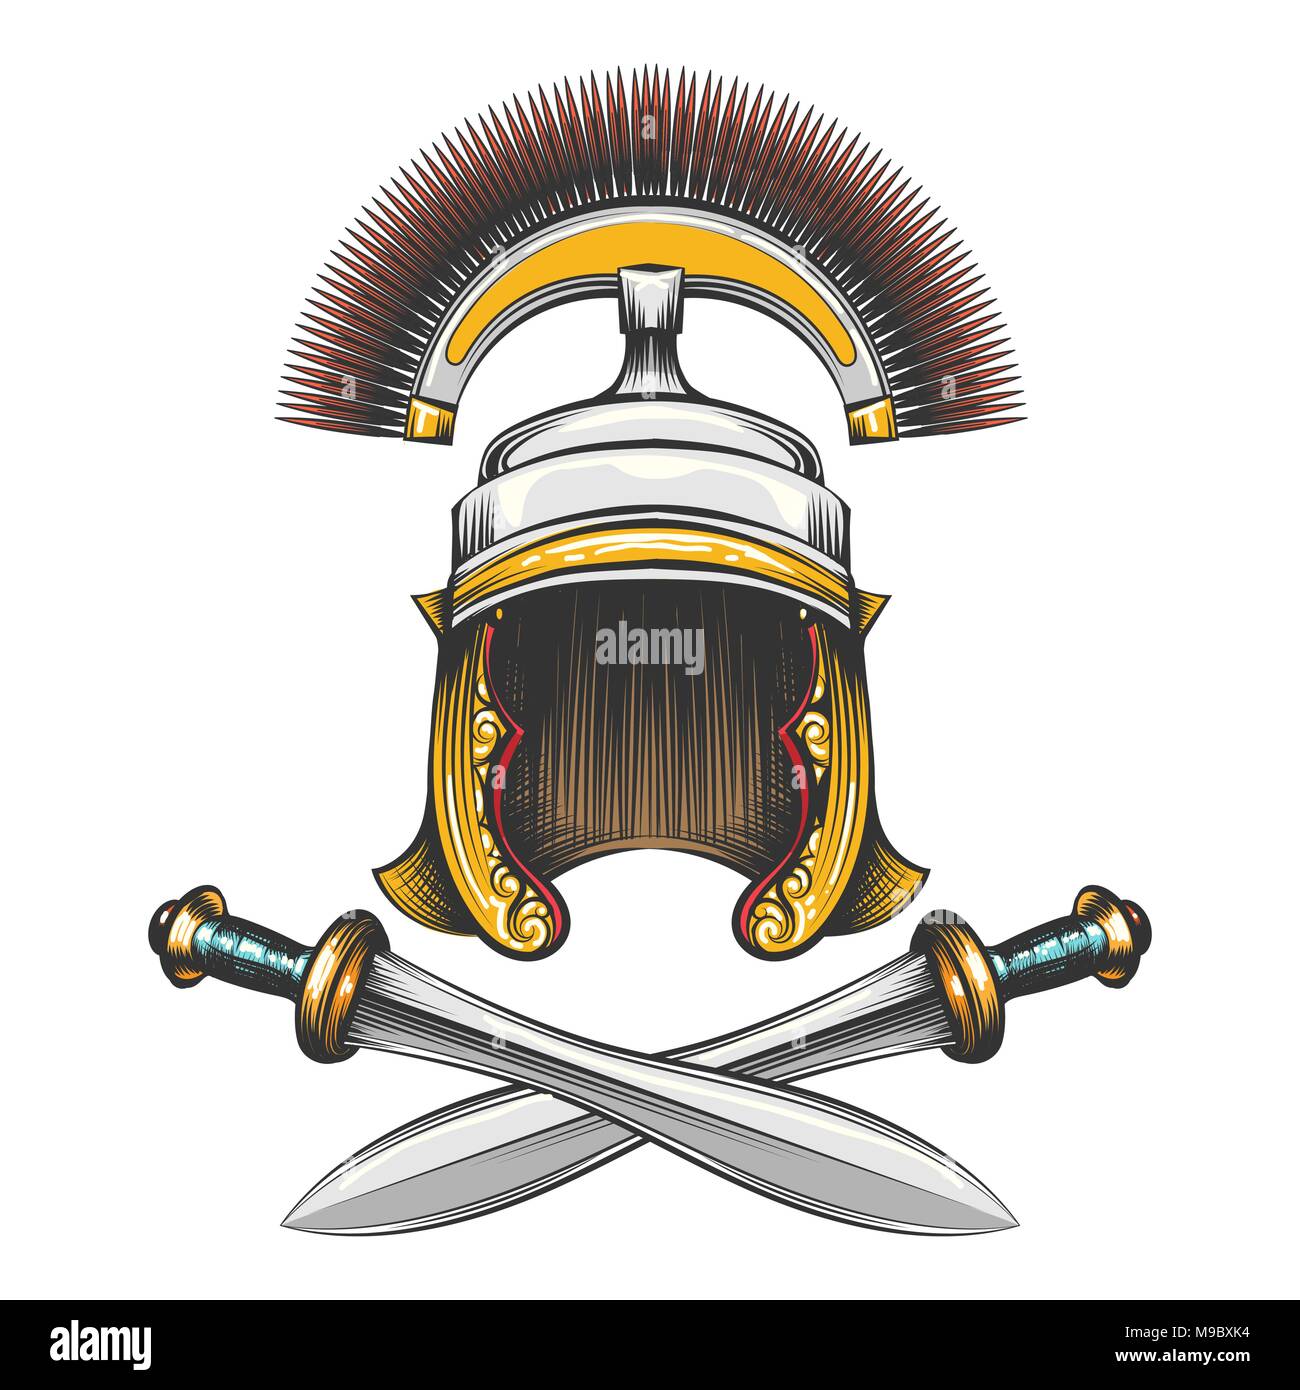 Roman Empire centurion helmet with crossed swords drawn in engraving style. Vector illustration. Stock Vector